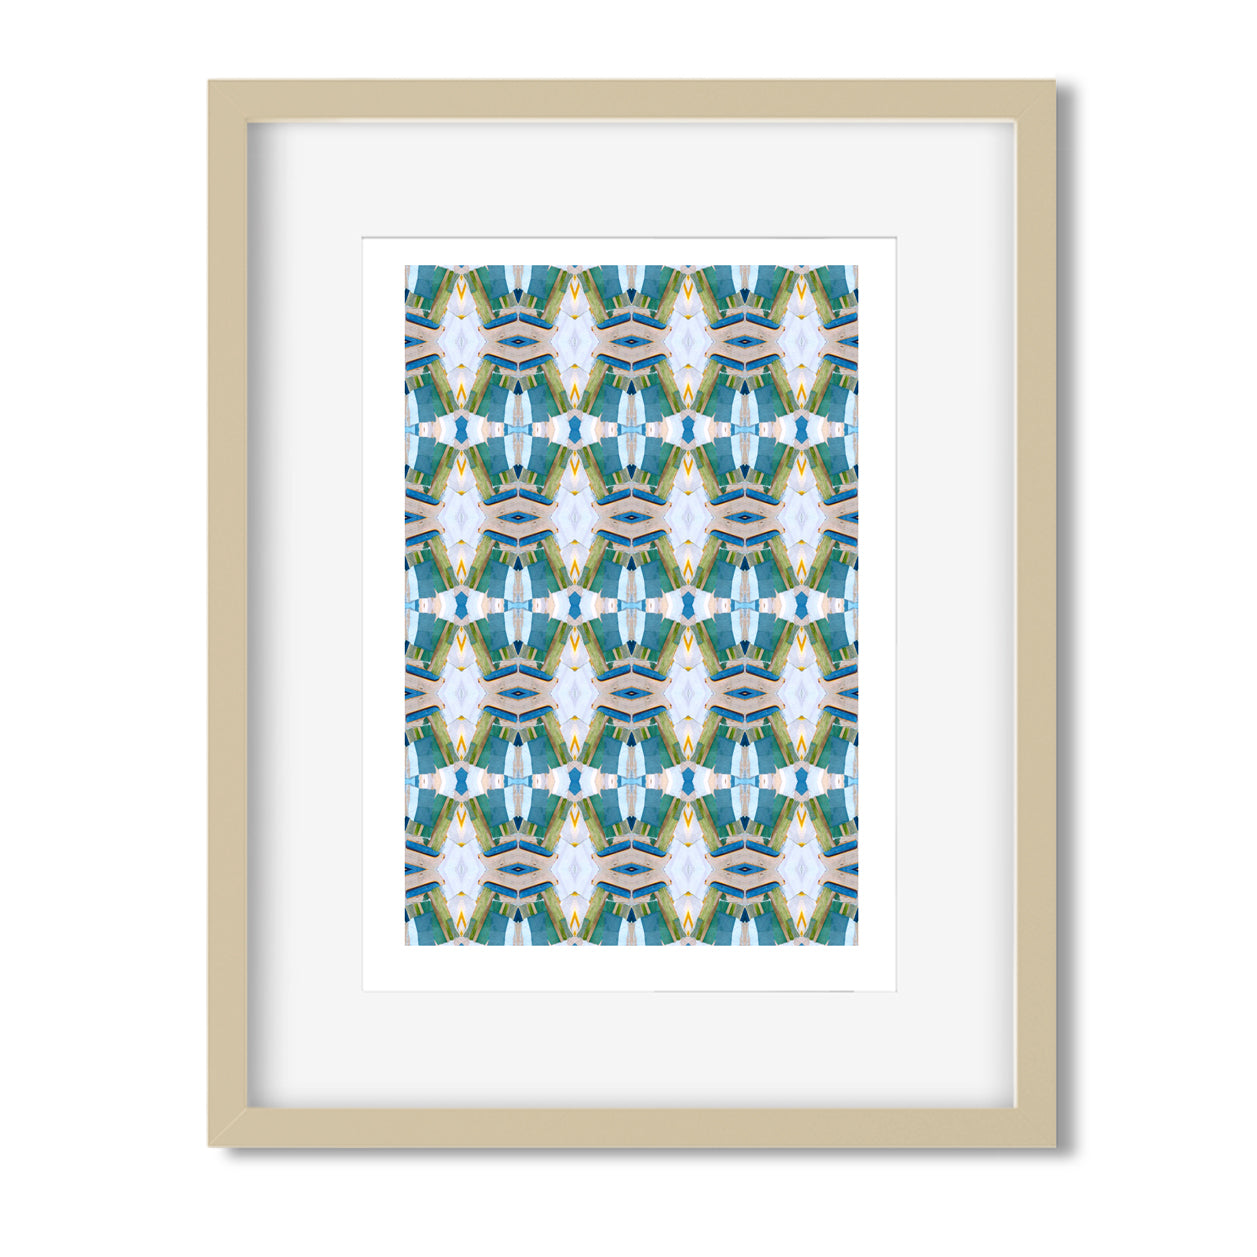 Framed print featuring abstract collaged pattern in turquoise.